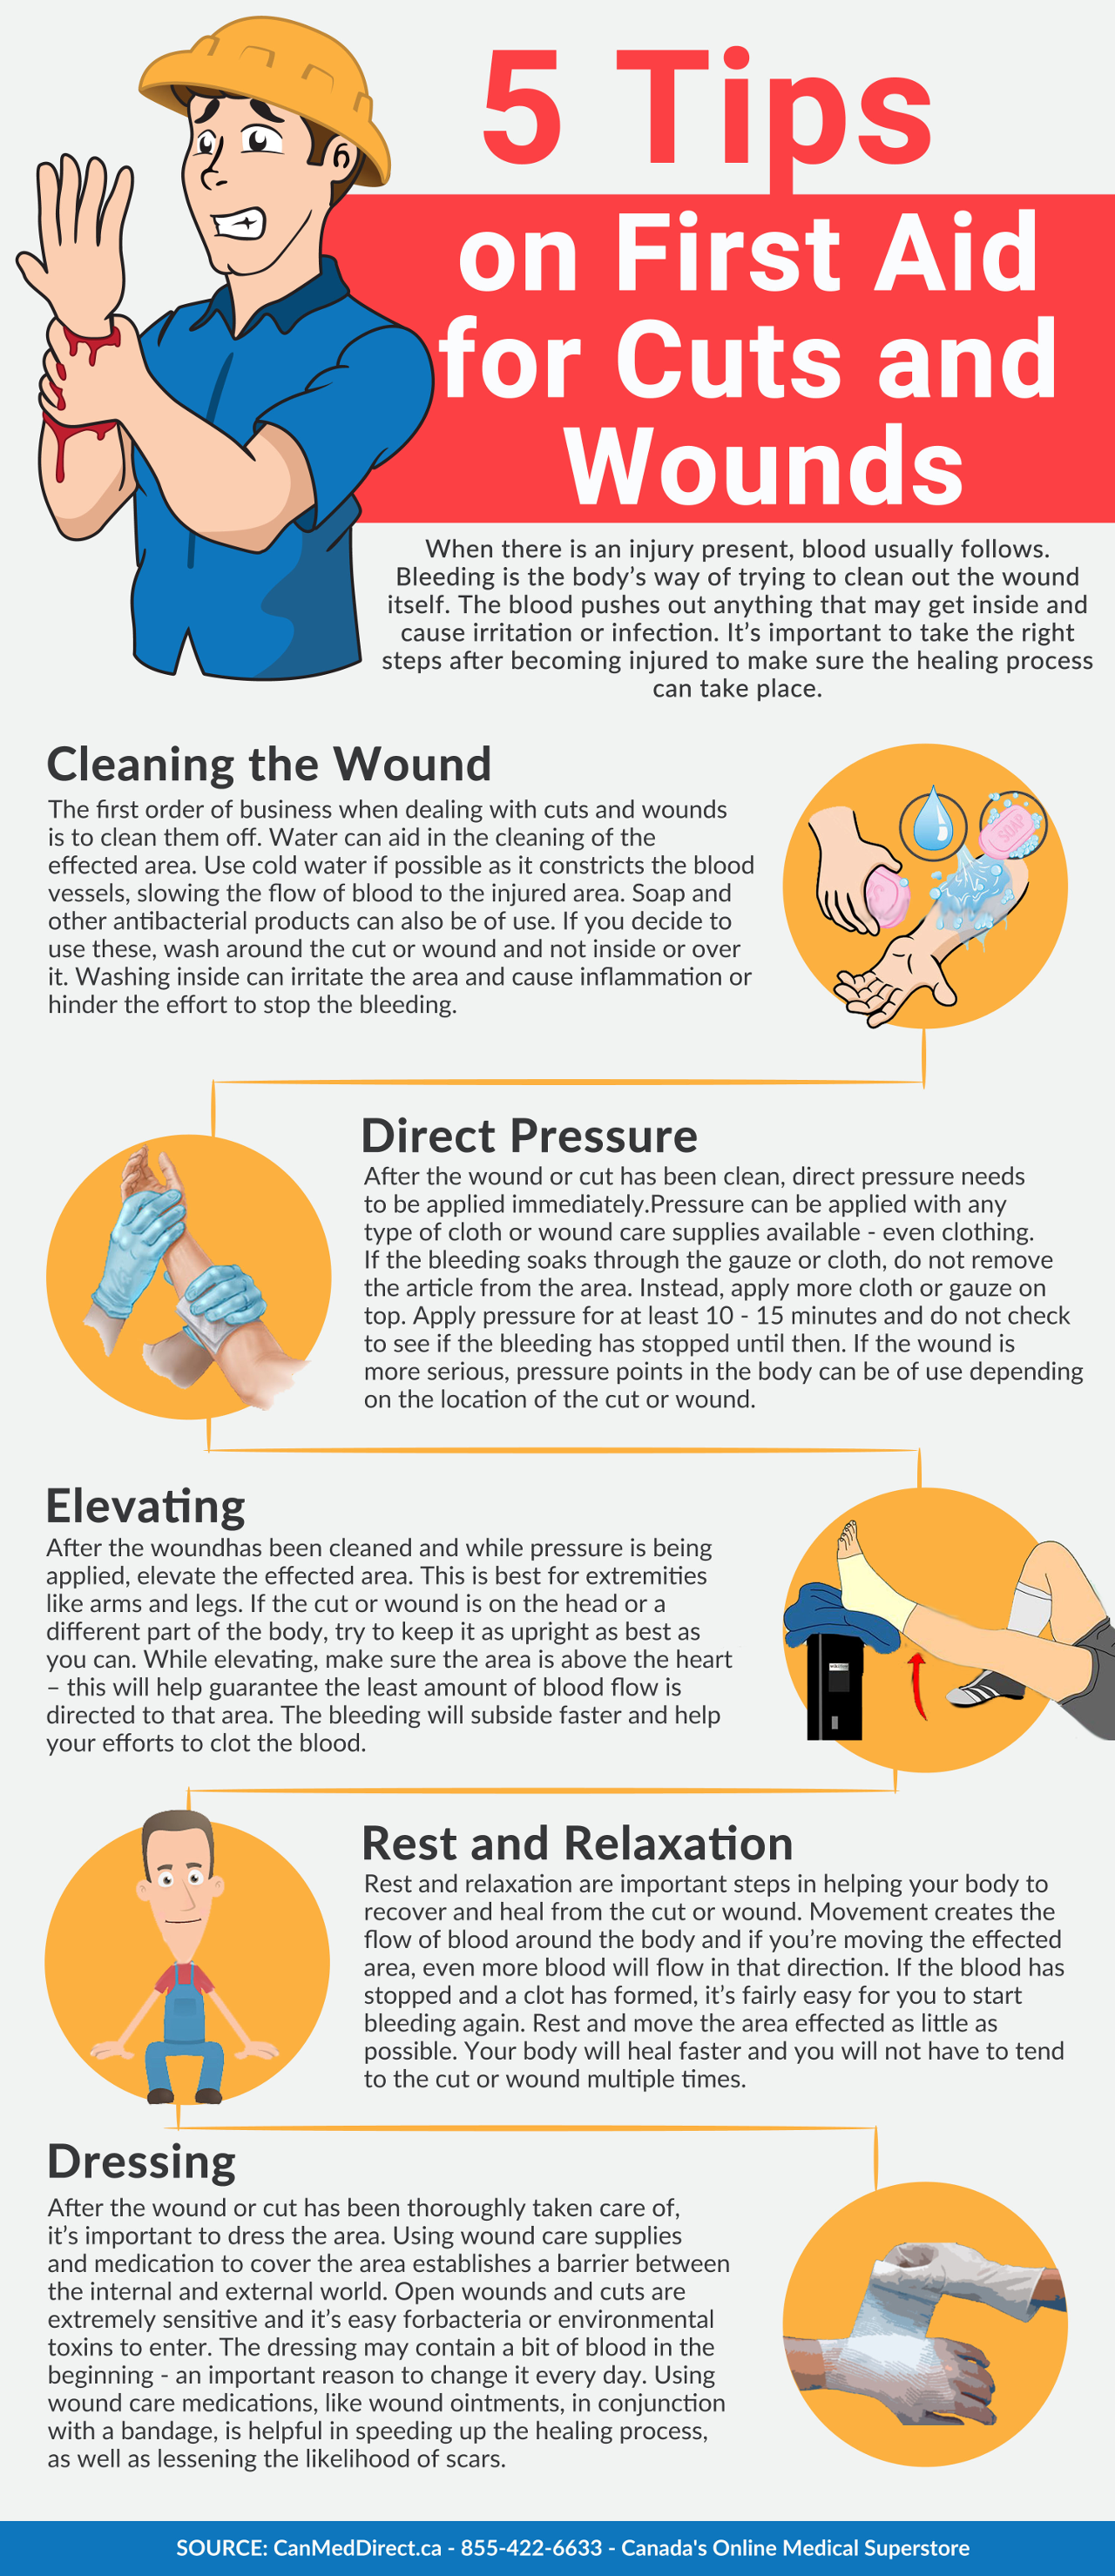 5 Tips on First Aid for Cuts and Wounds - Infographic